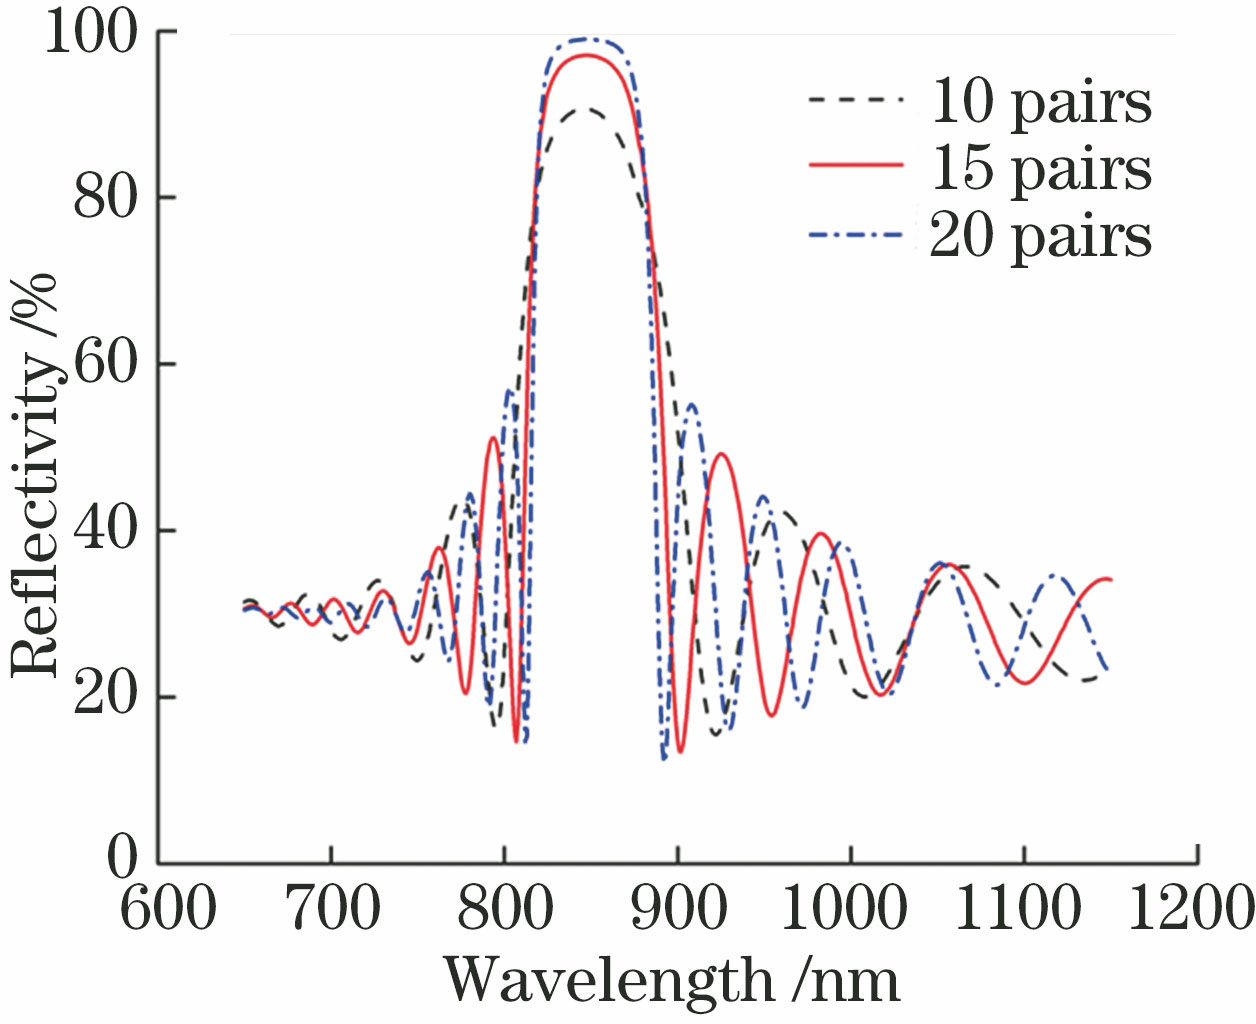 Relationship between reflectivity and wavelength for different pairs of DBR